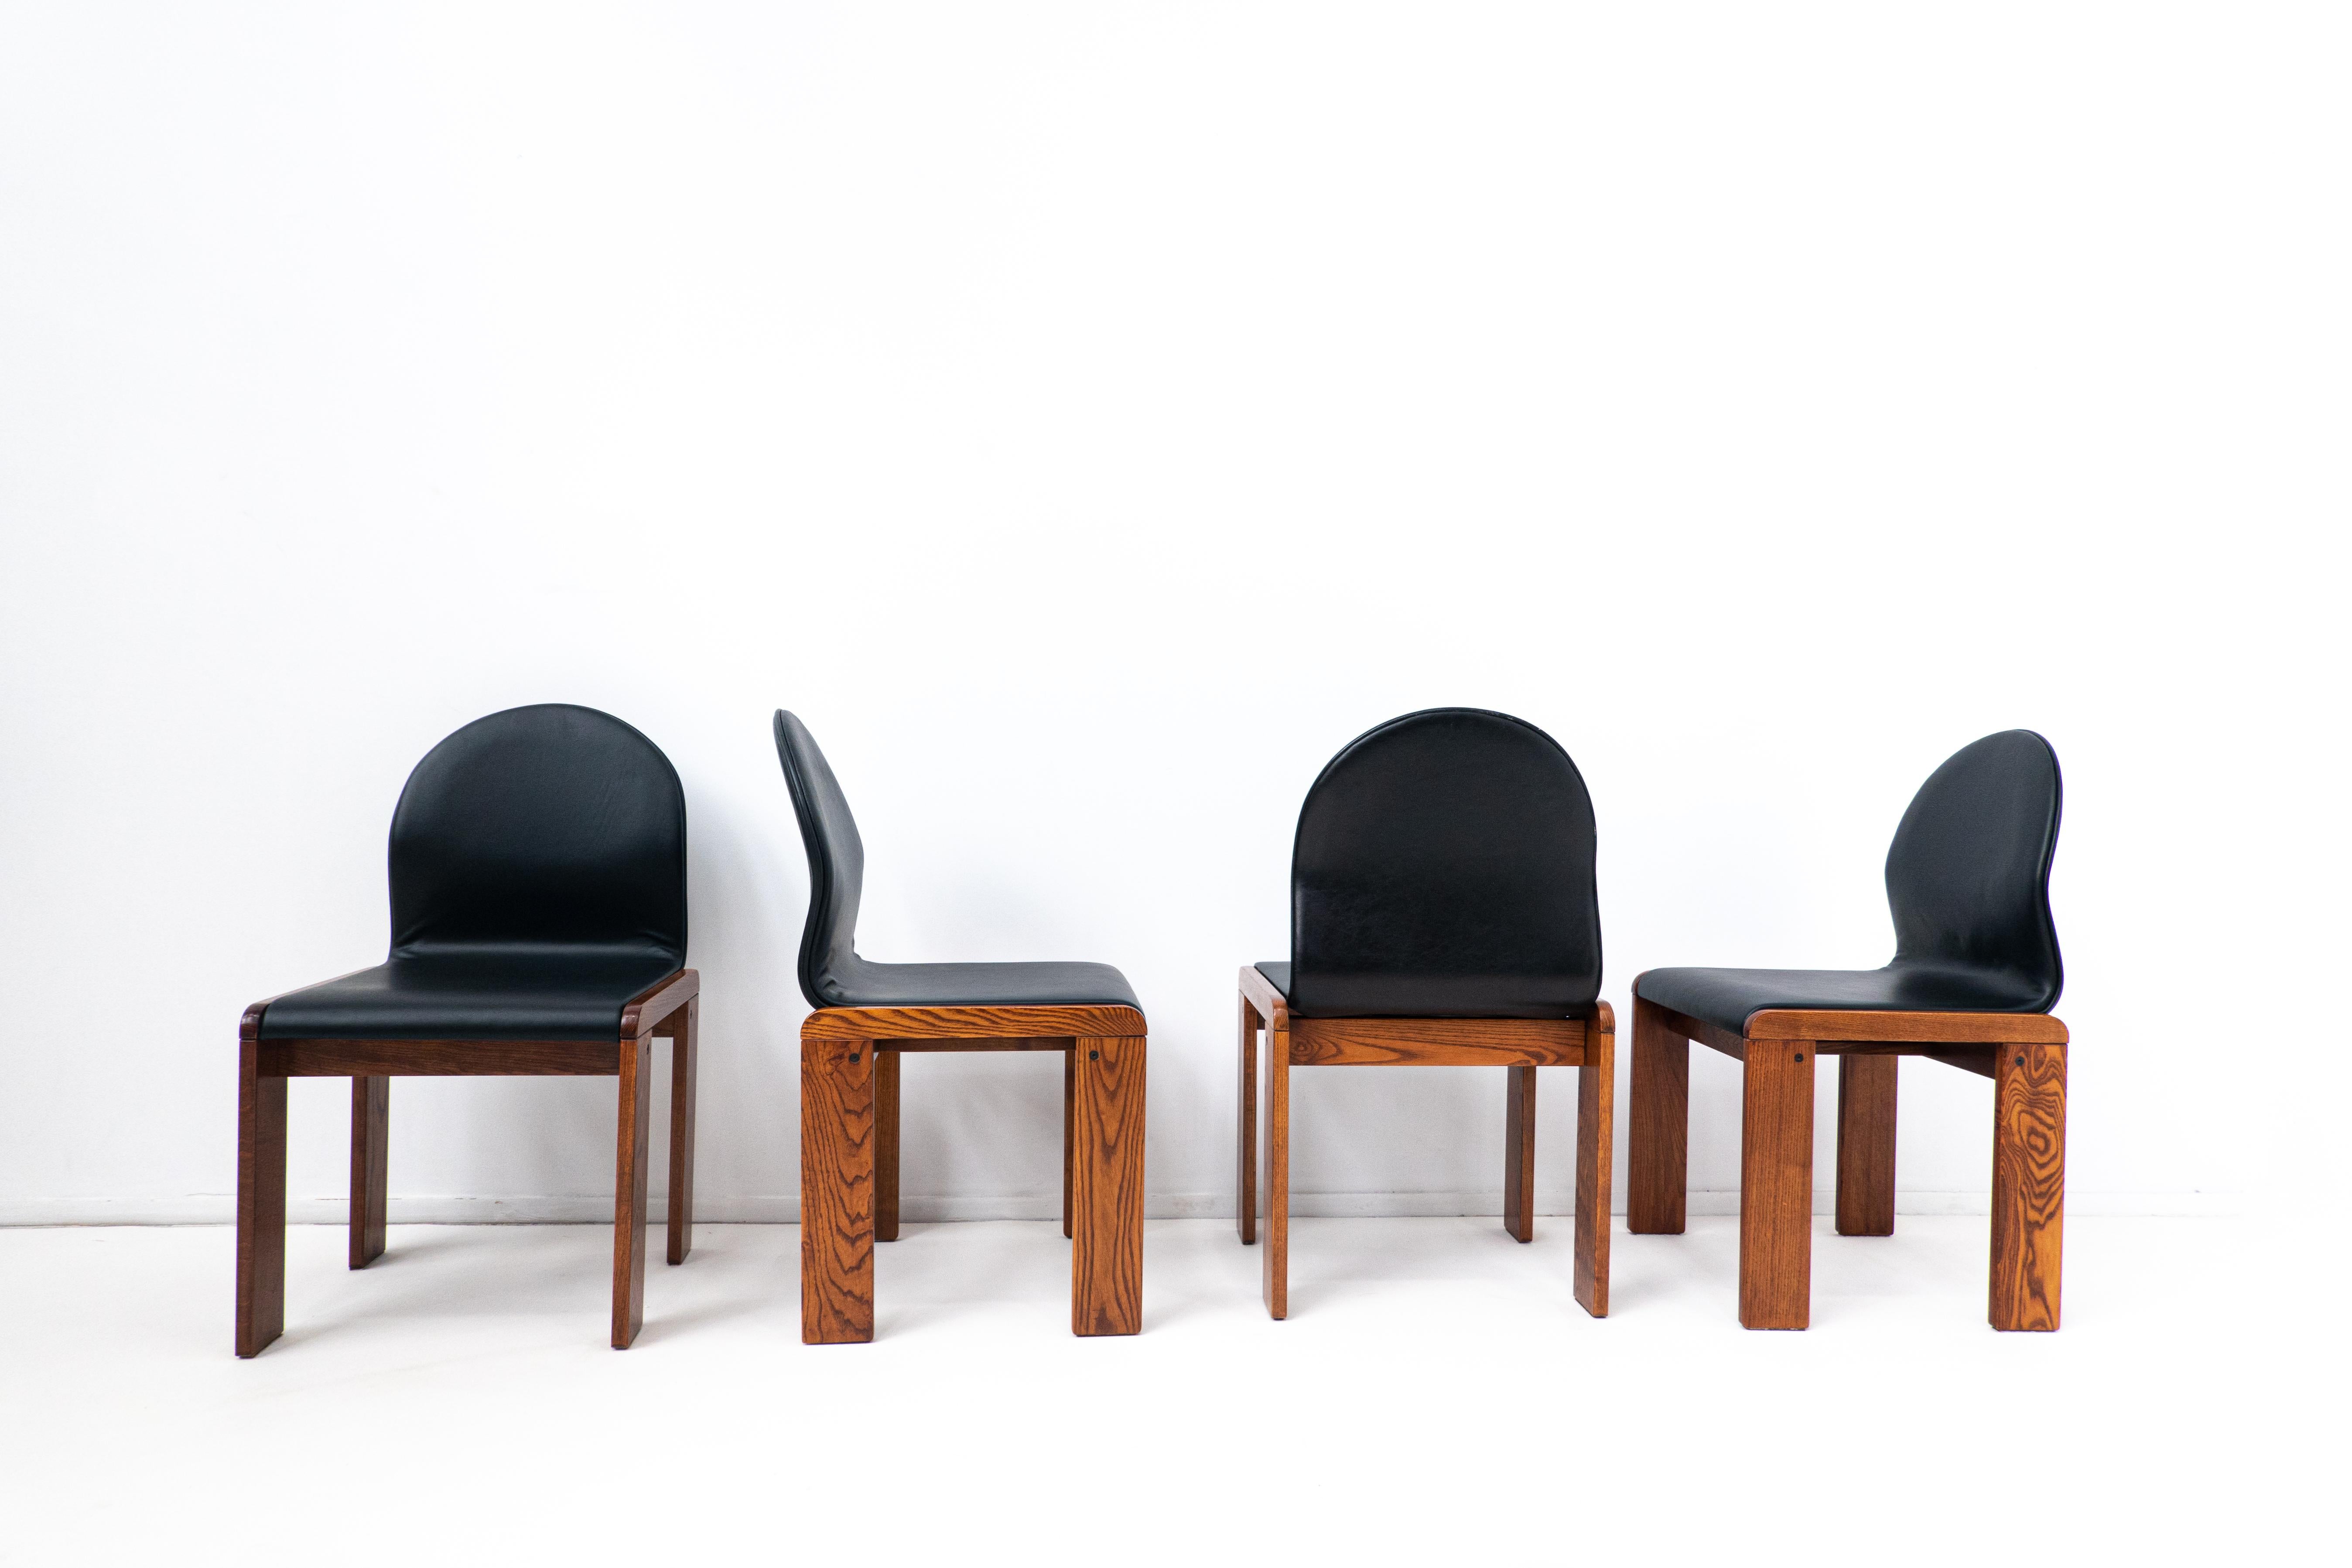 Italian Set of 4 Walnut and Leather Chairs by Afra and Tobia Scarpa, Italy, 1970s